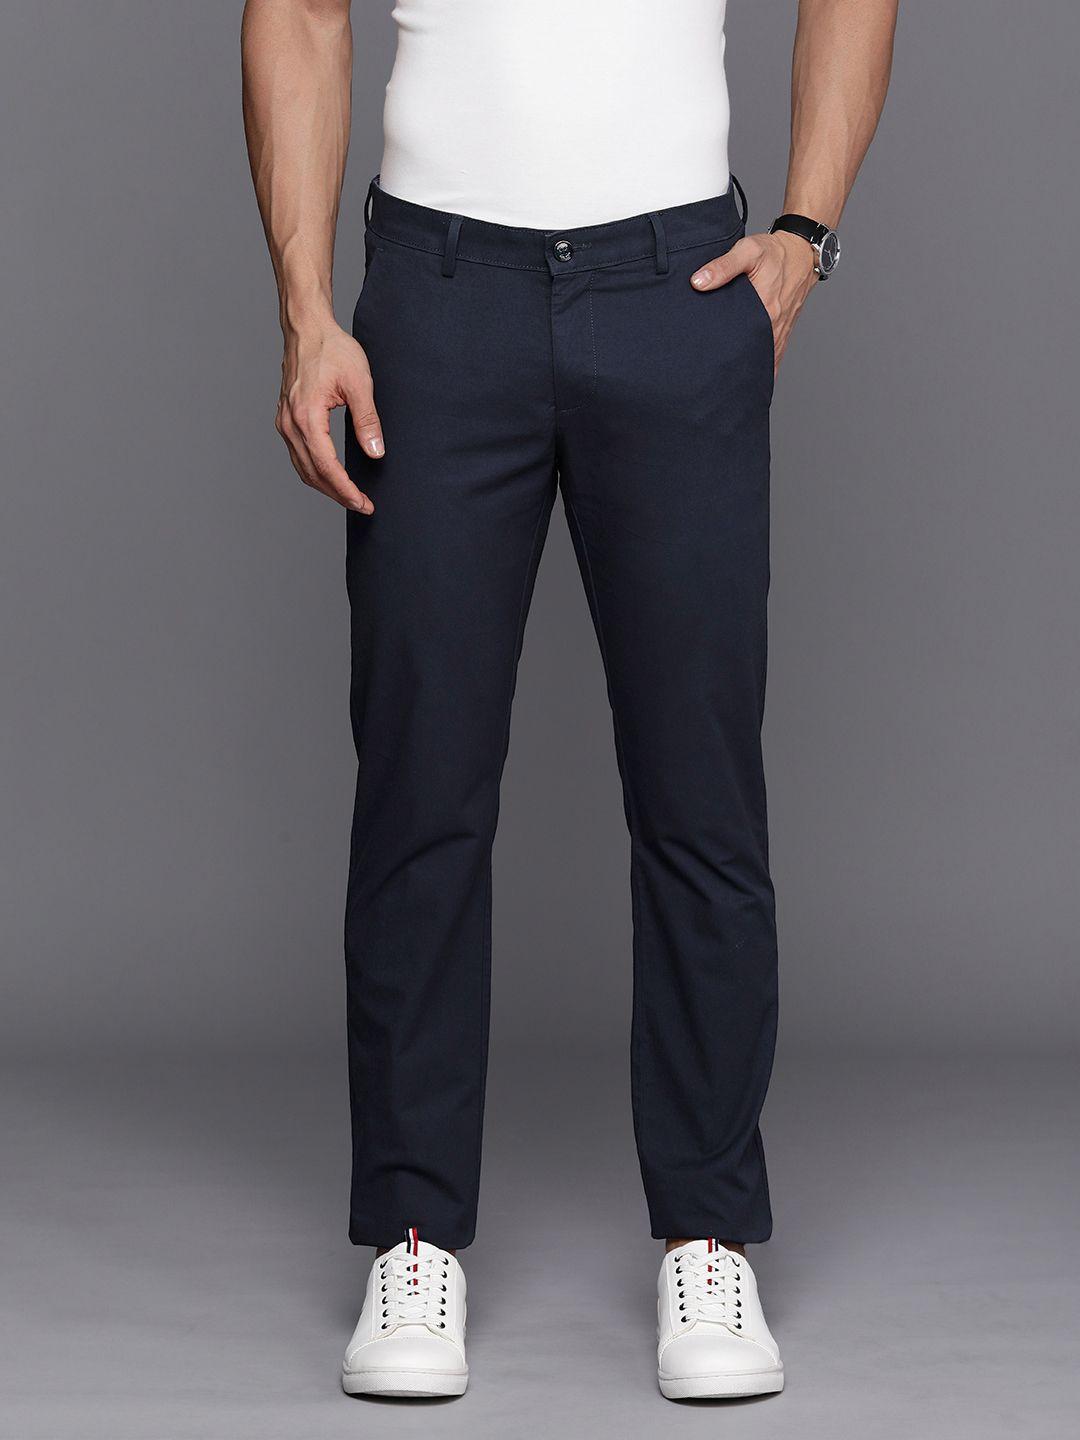 allen-solly-men-solid-slim-fit-mid-rise-chinos